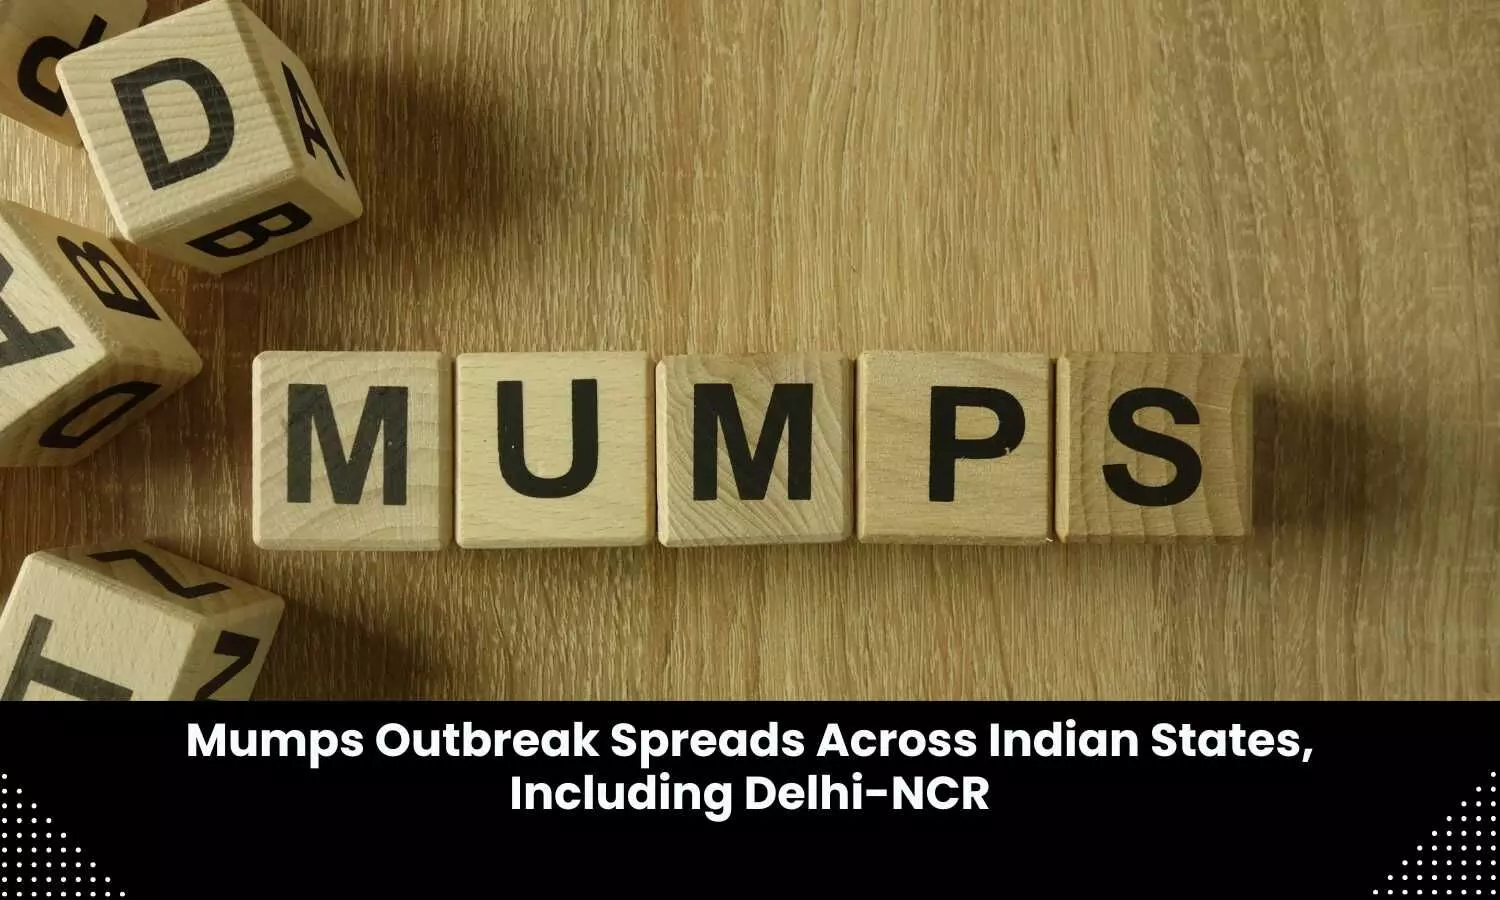 Surge in mumps cases across Indian states